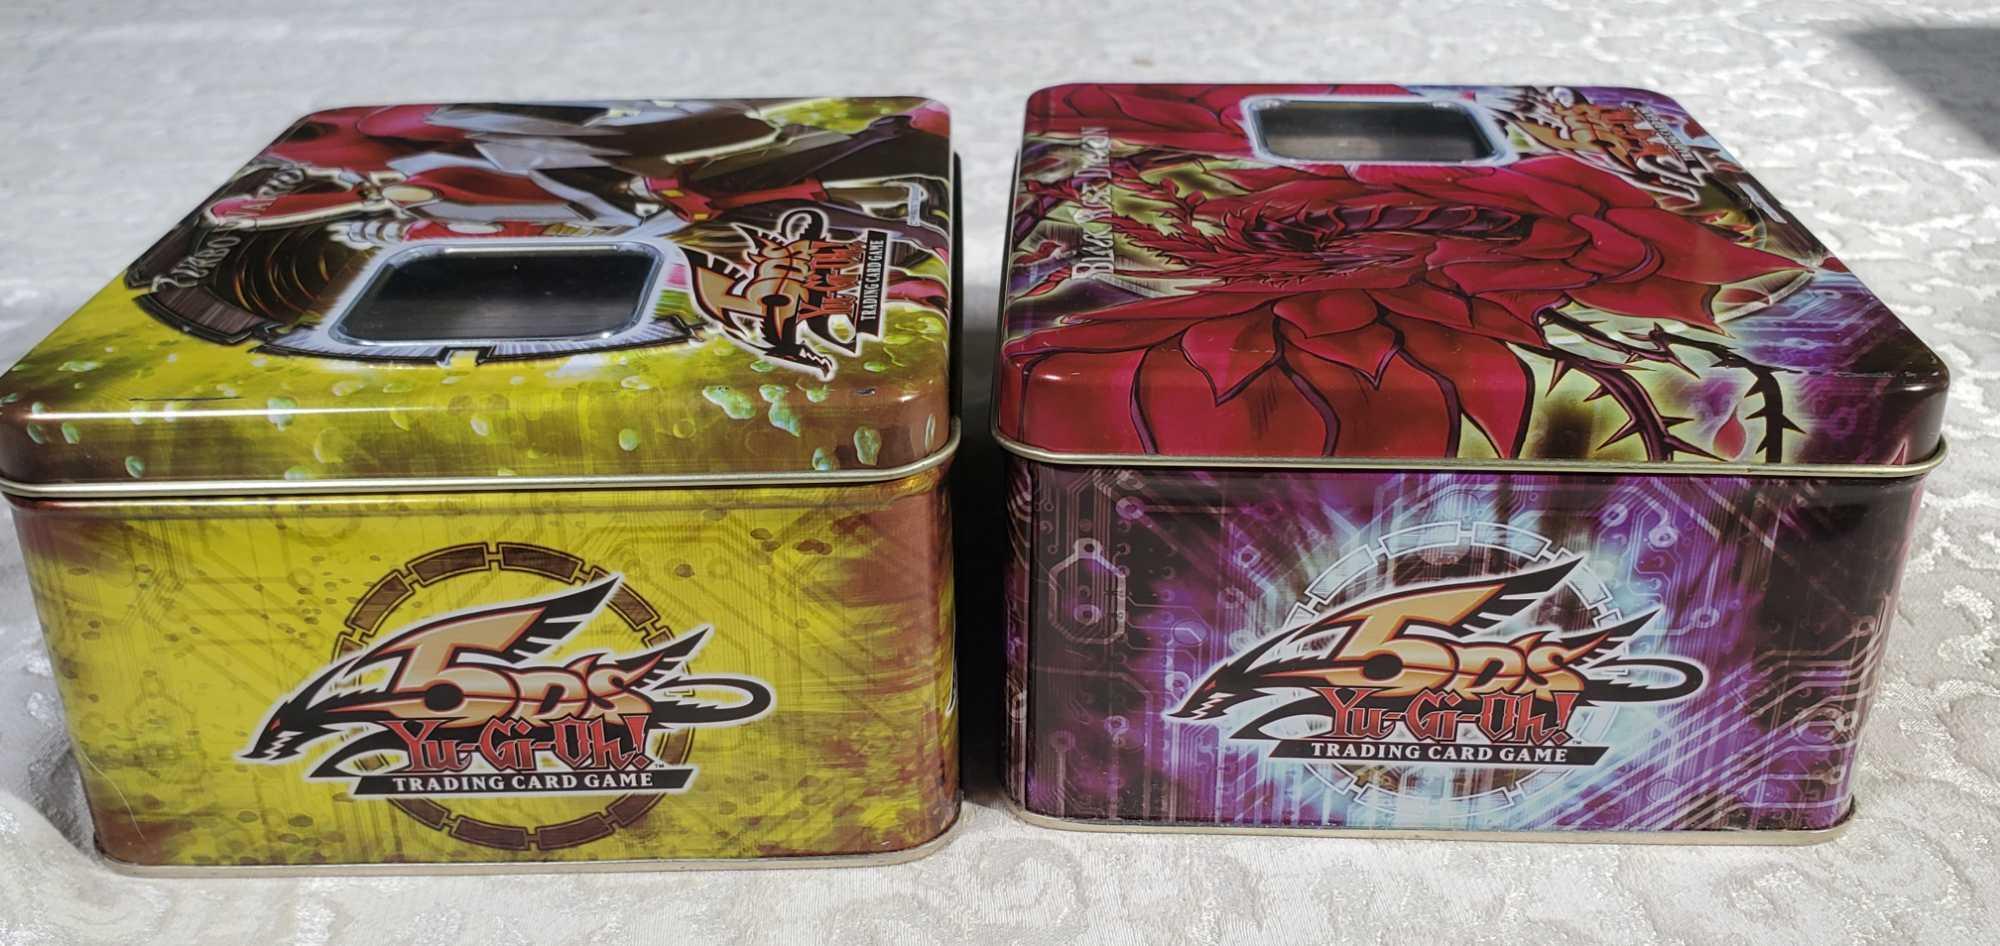 8 Yu-Gi-Oh! Collector Tins with Cards - 4 5DS and 4 Shonen Jump's - Series 2, 5 and 6, 2005-2009